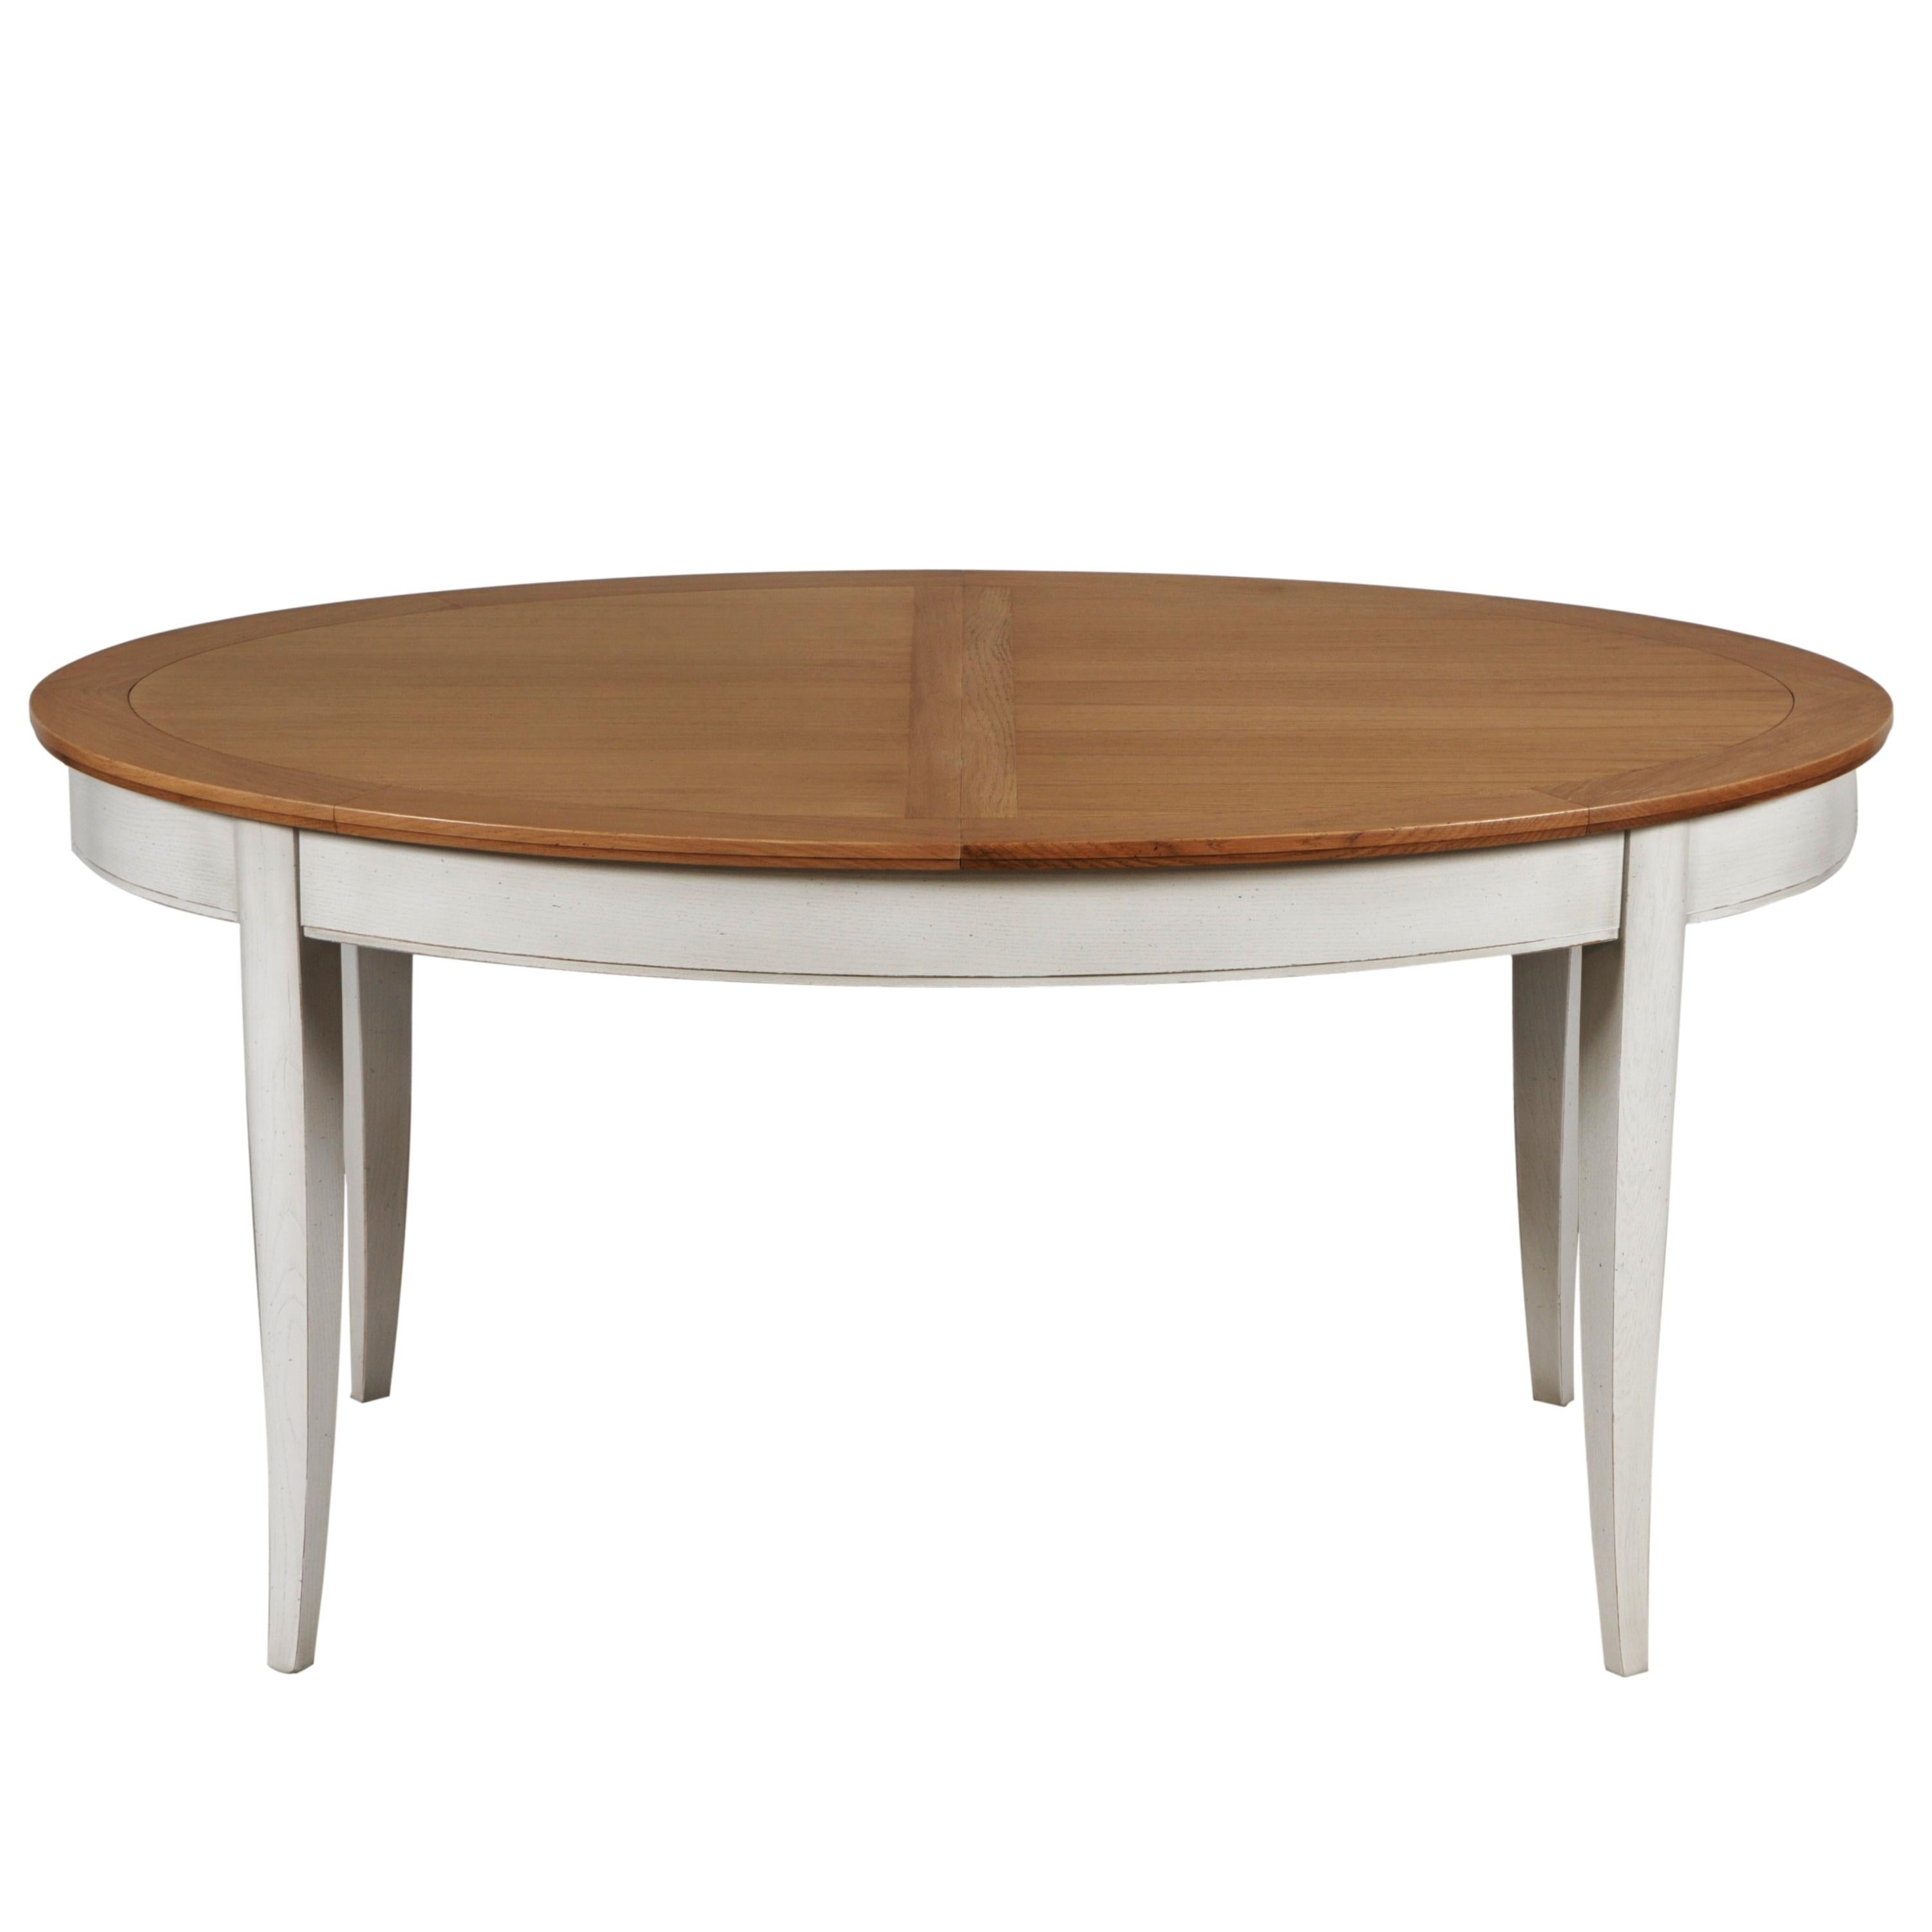 Hand-Crafted Oval Table in Solid Oak, 2 Extensions, Chestnut Stained & Pearl-Grey Lacquered For Sale